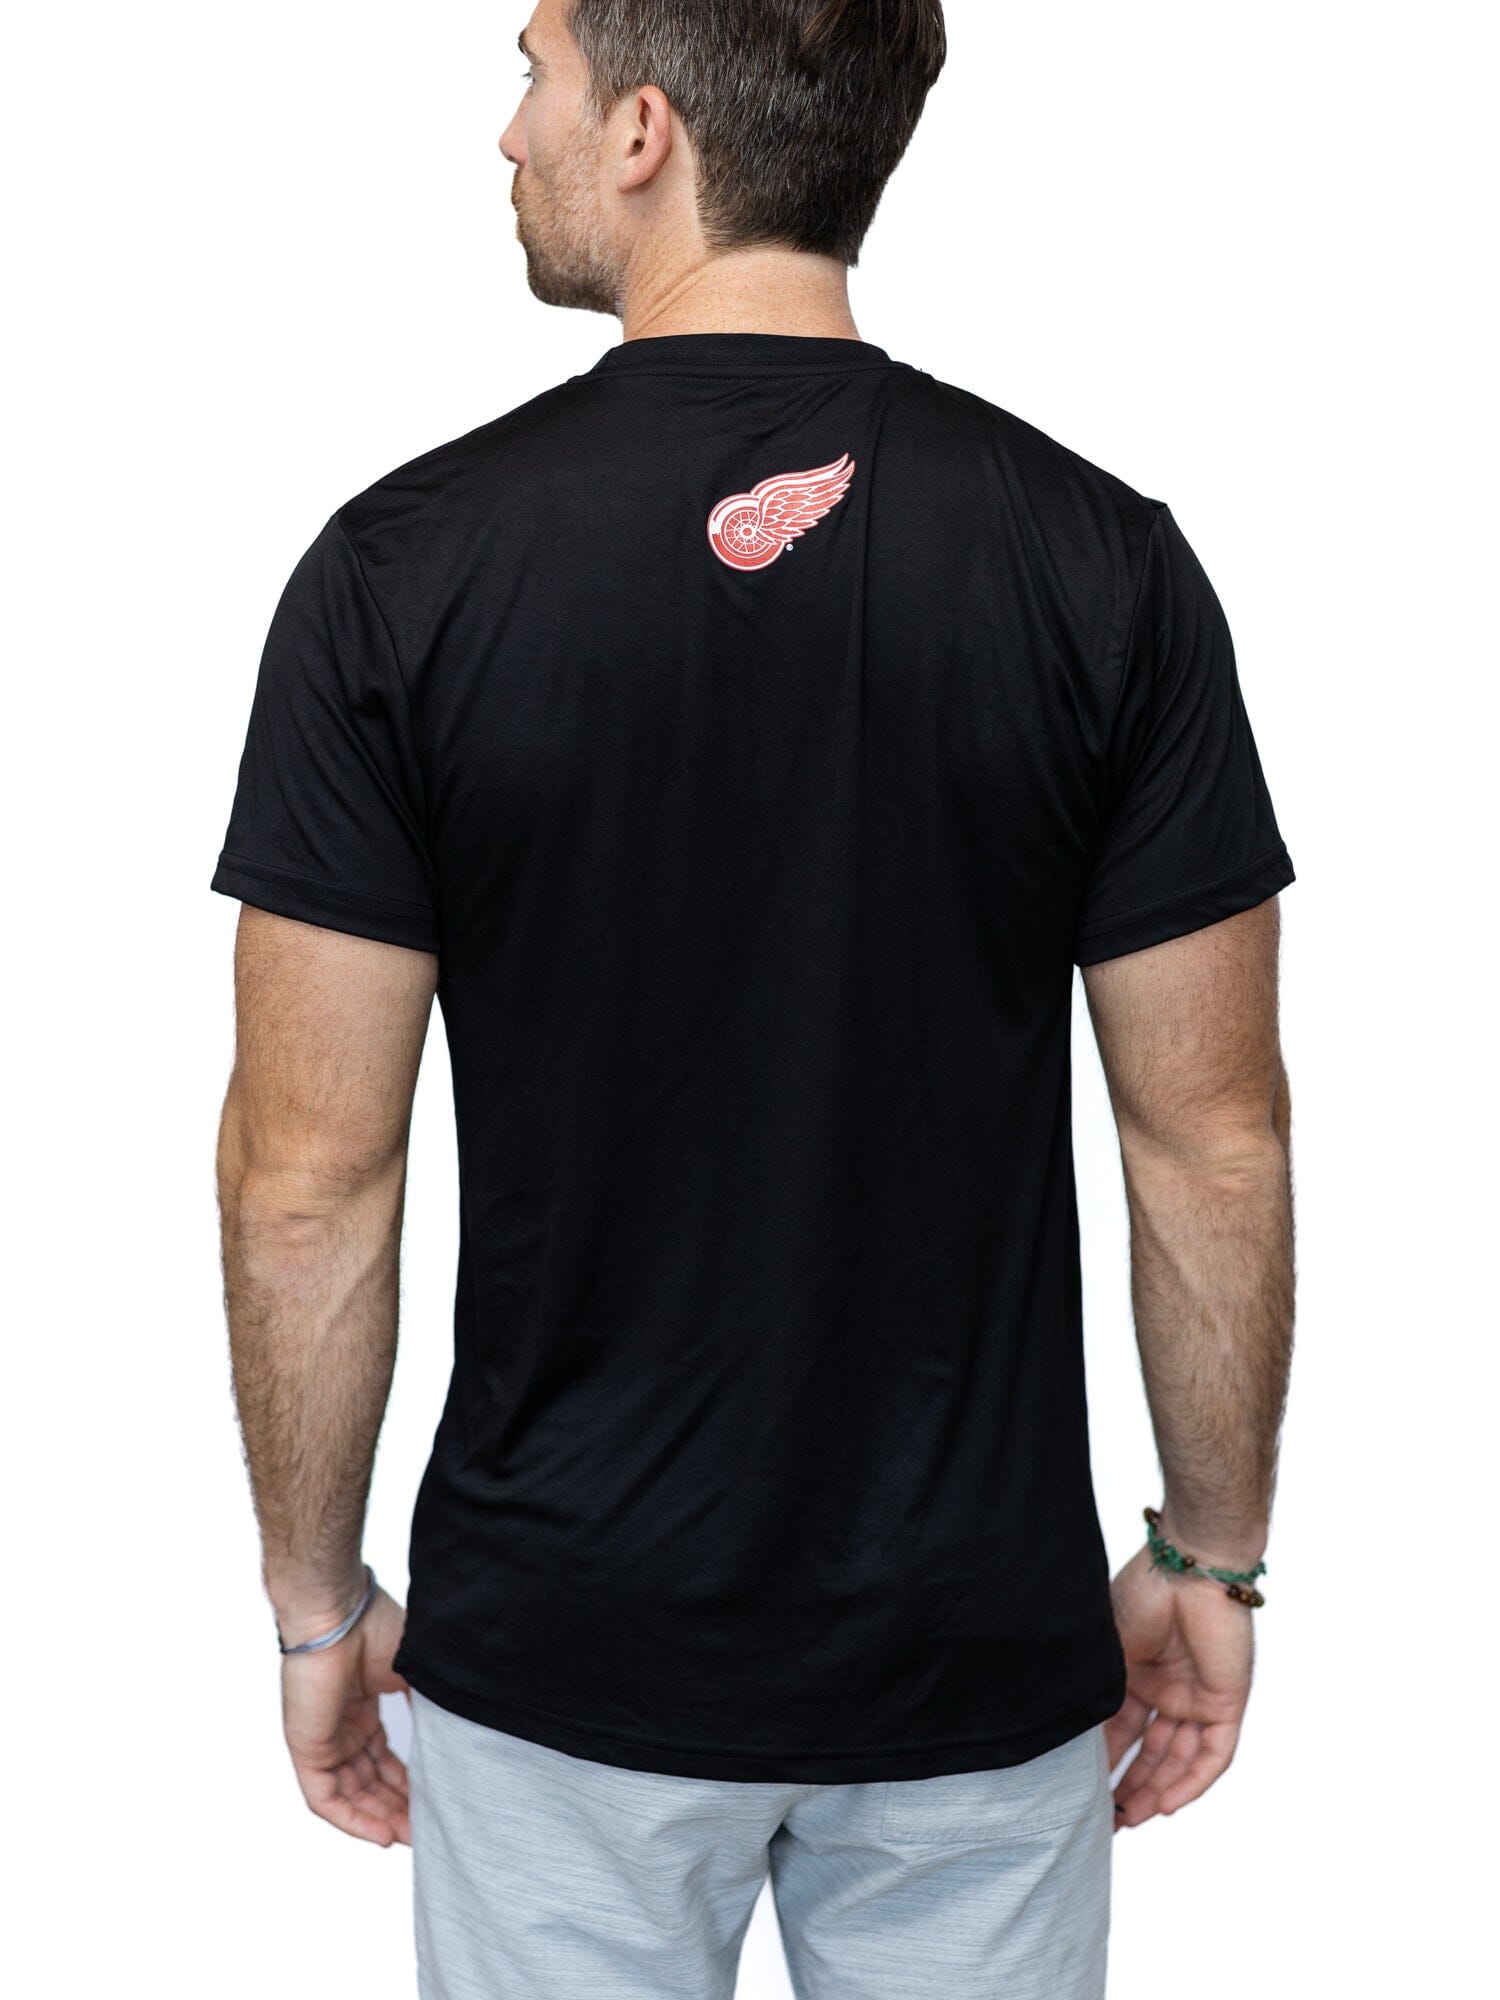 Detroit red wings team covert Shirt - Limotees